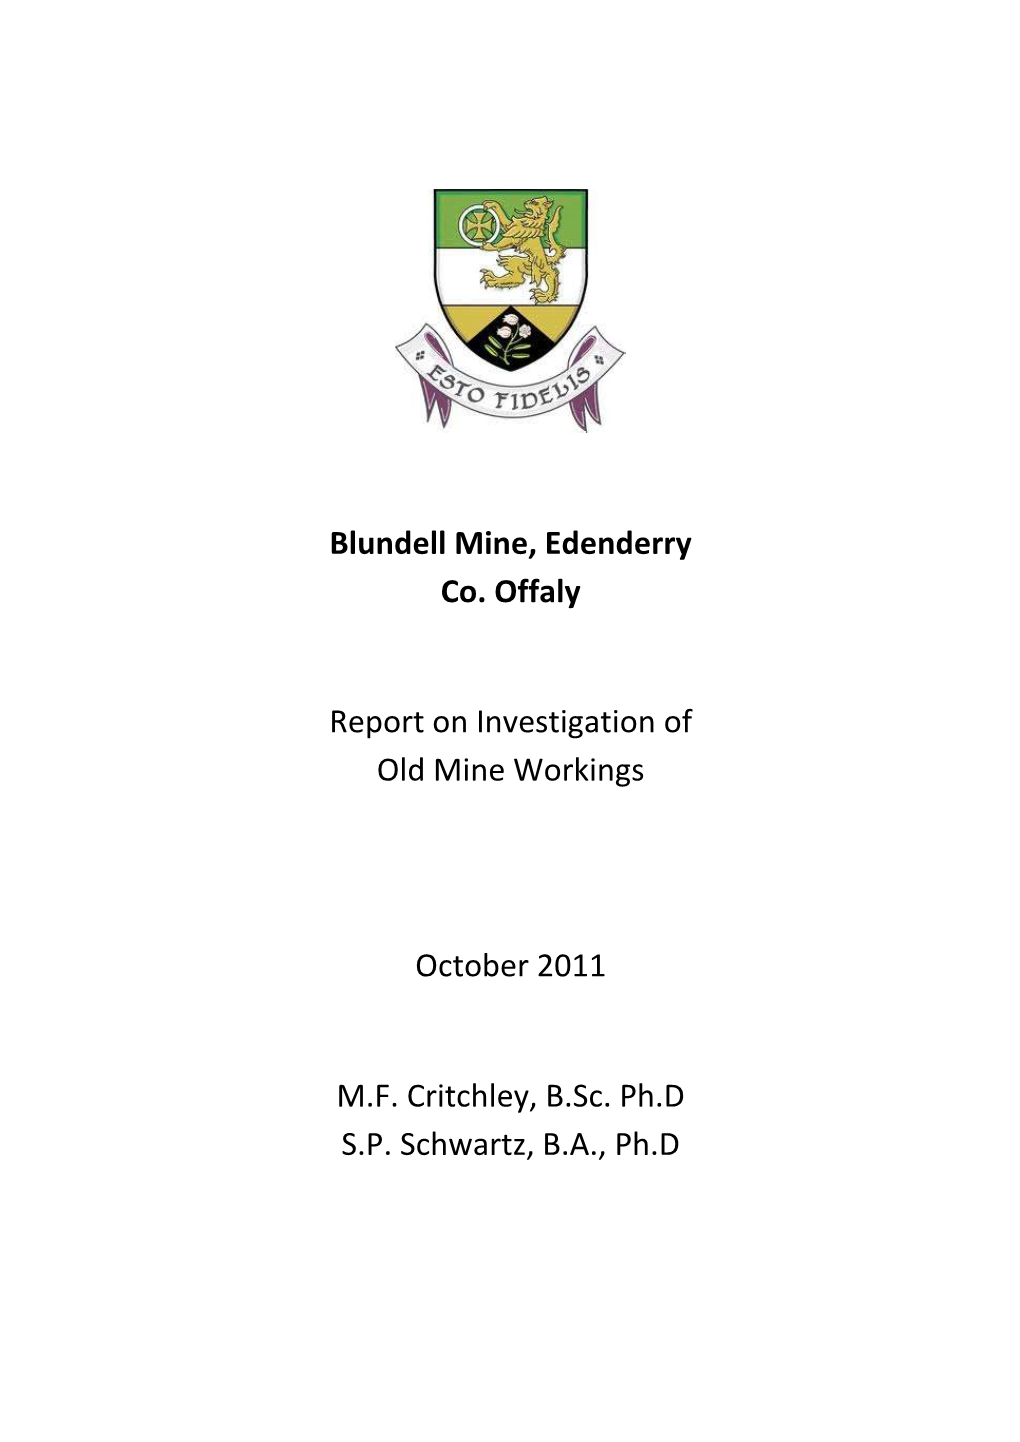 Blundell Mine, Edenderry Co. Offaly Report on Investigation of Old Mine Workings October 2011 M.F. Critchley, B.Sc. Ph.D S.P. Sc